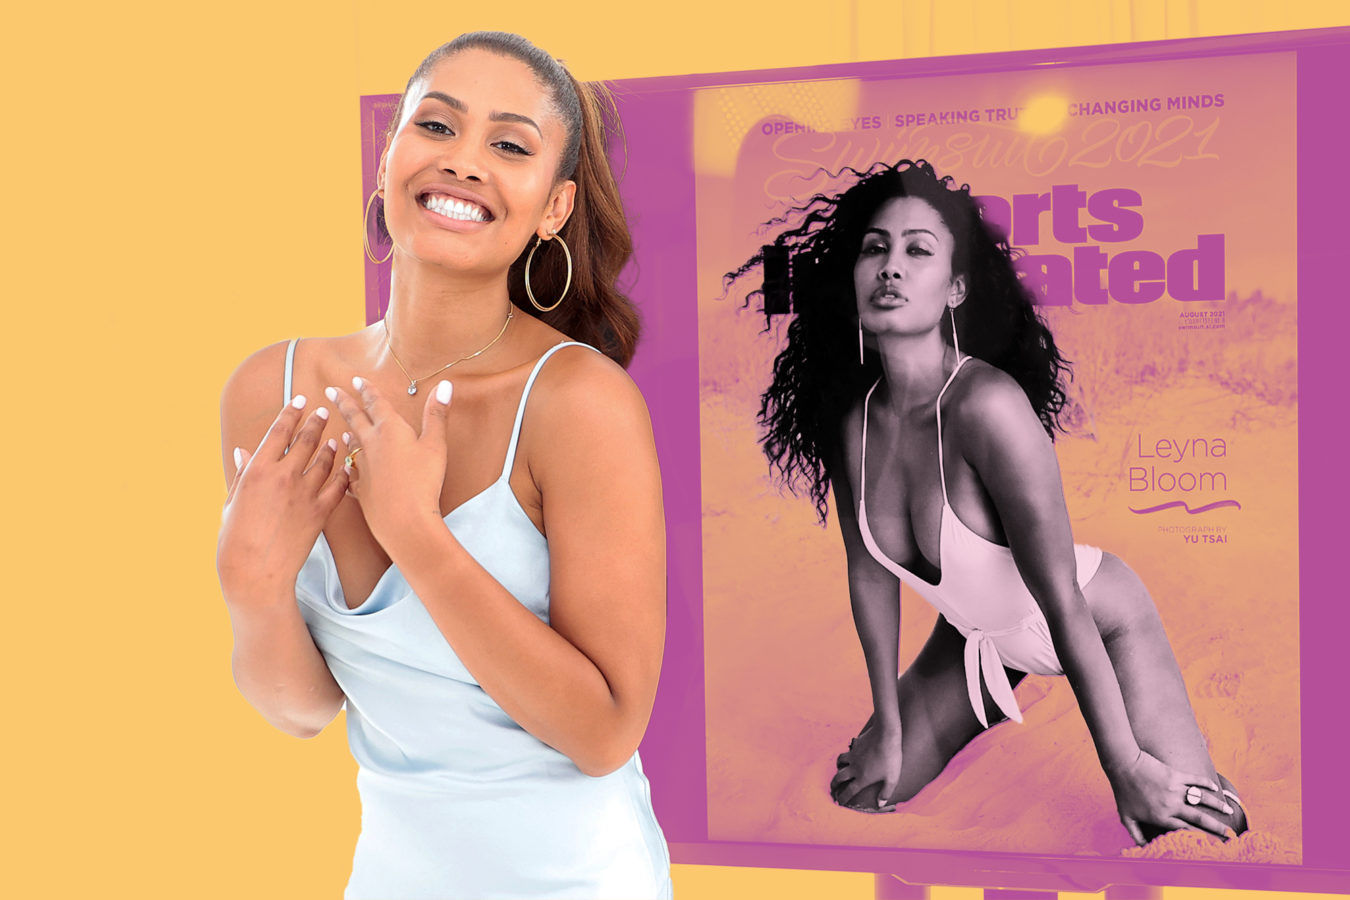 Leyna Bloom makes history as Sports Illustrated Swimsuit’s first transgender cover model